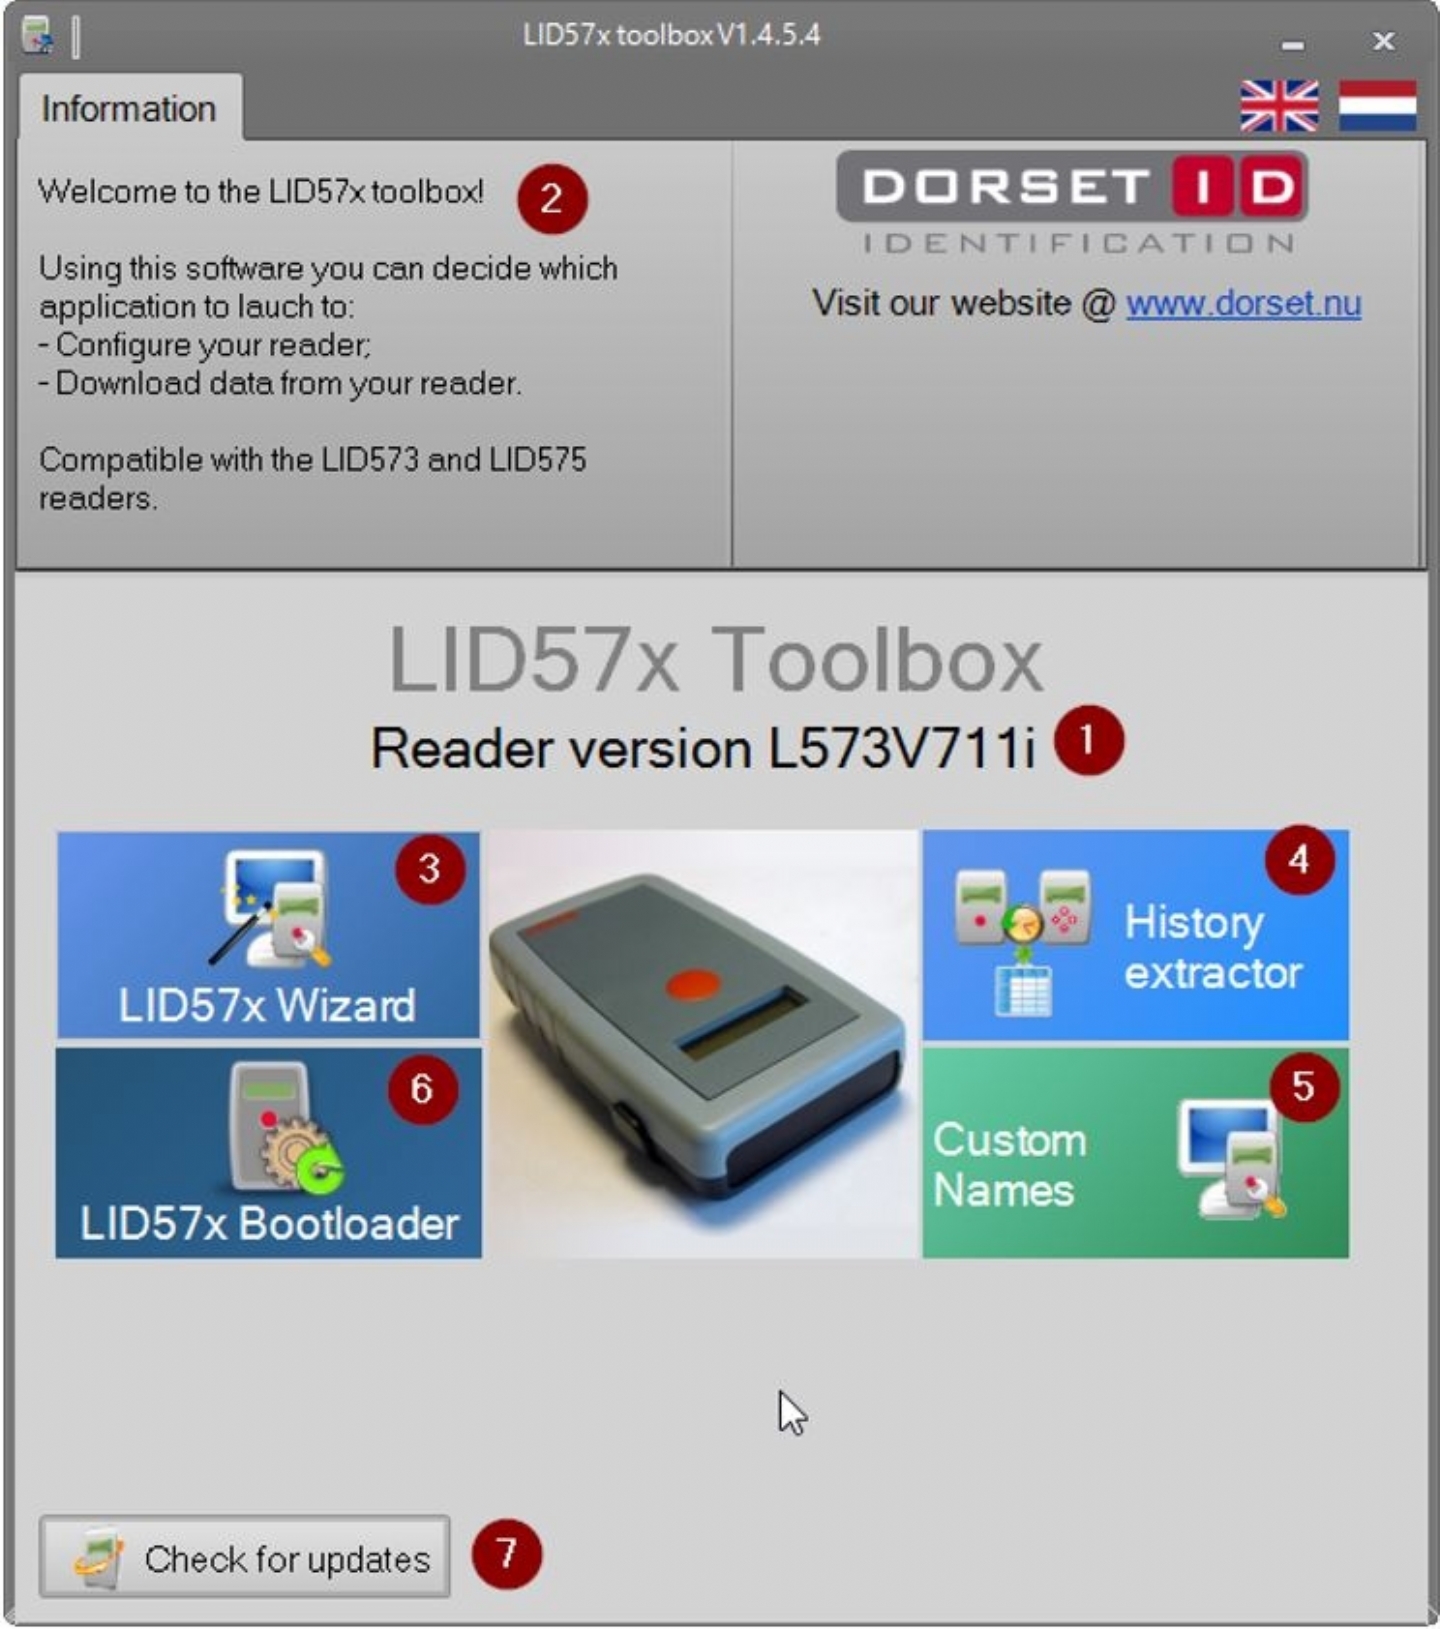 New LID 57x Toolbox Software released